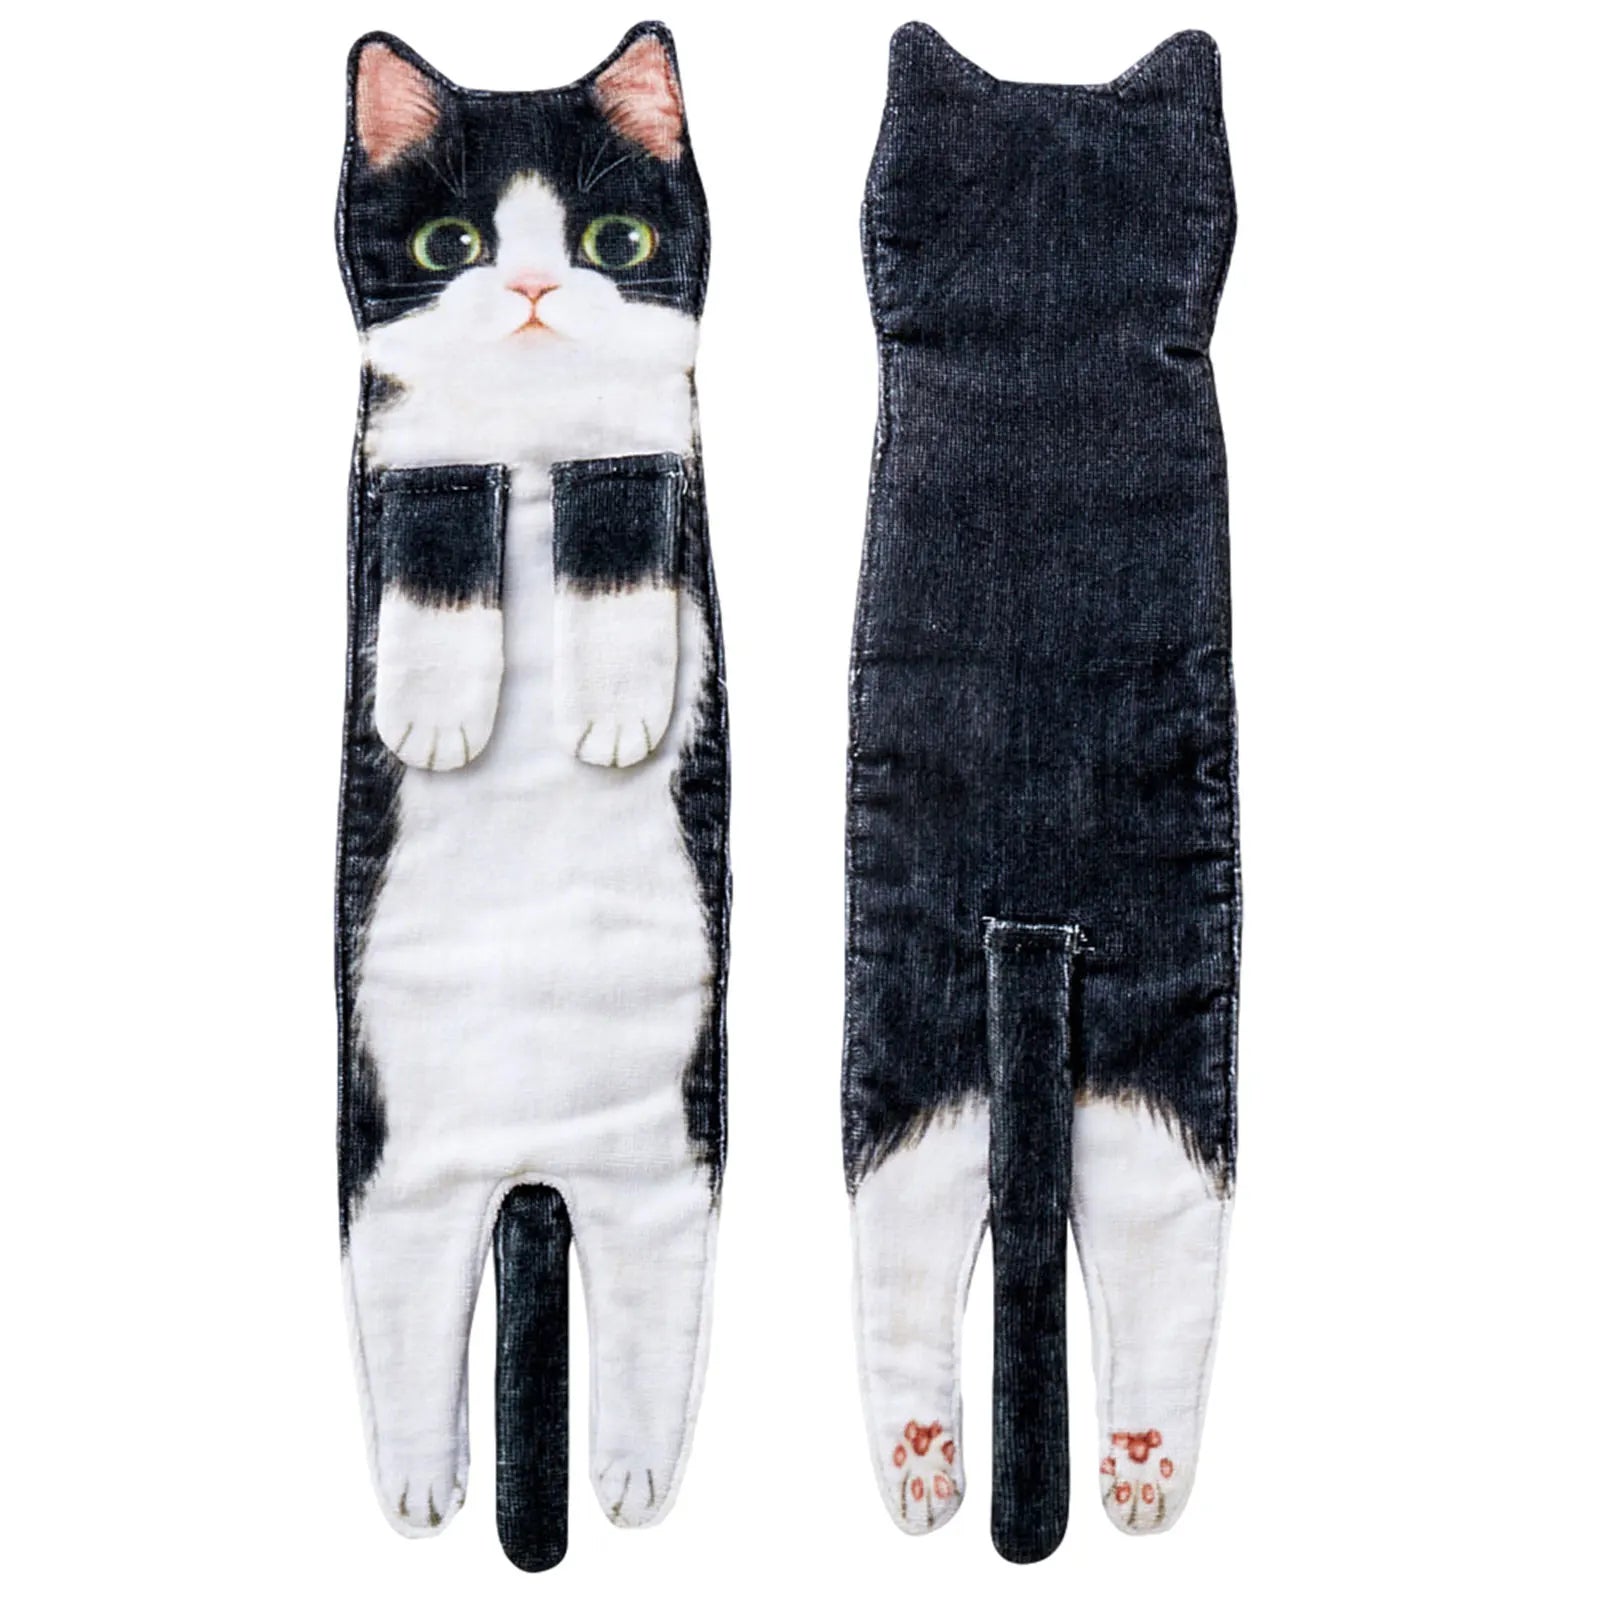 Creative and Humorous Cat-Themed Hand Towels: Soft, Absorbent, and Perfect for Your Kitchen or Bathroom - Nekoby Creative and Humorous Cat-Themed Hand Towels: Soft, Absorbent, and Perfect for Your Kitchen or Bathroom black white cat||14 / CHINA||200007763